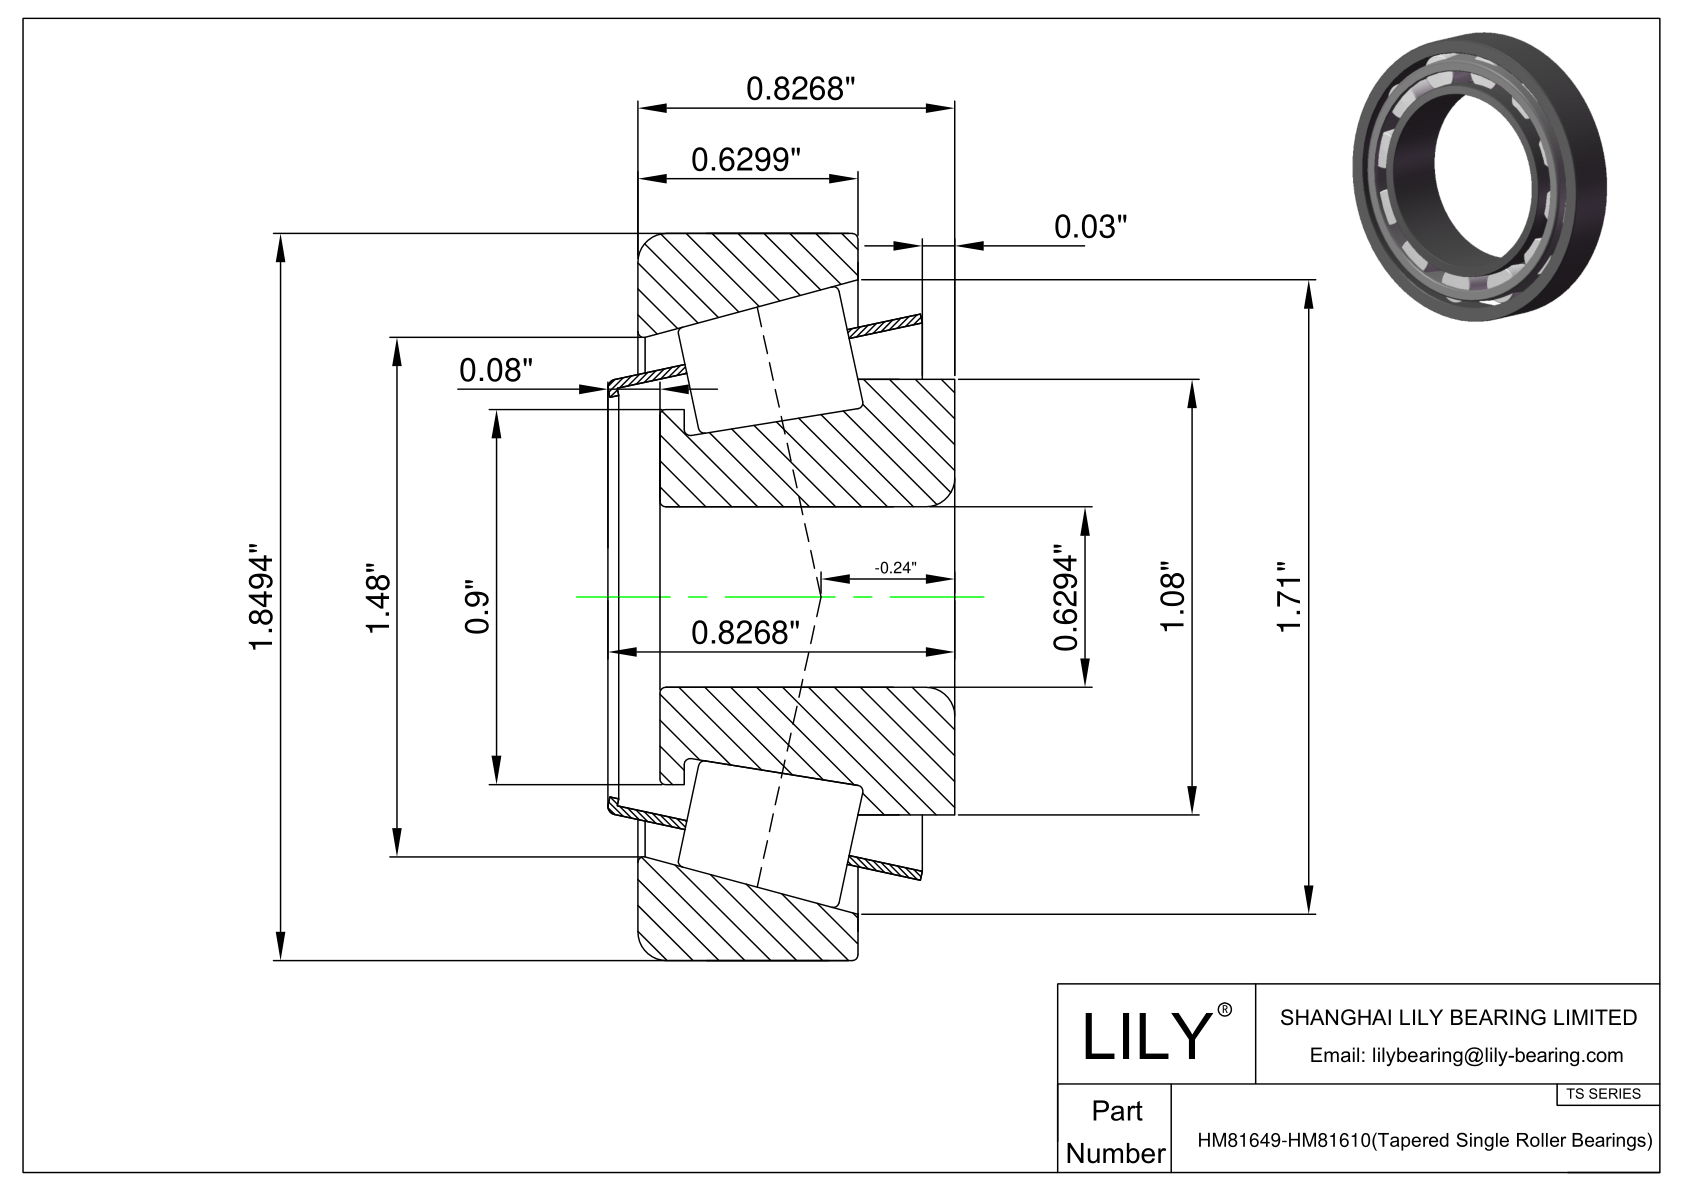 HM81649-HM81610 TS (Tapered Single Roller Bearings) (Imperial) cad drawing